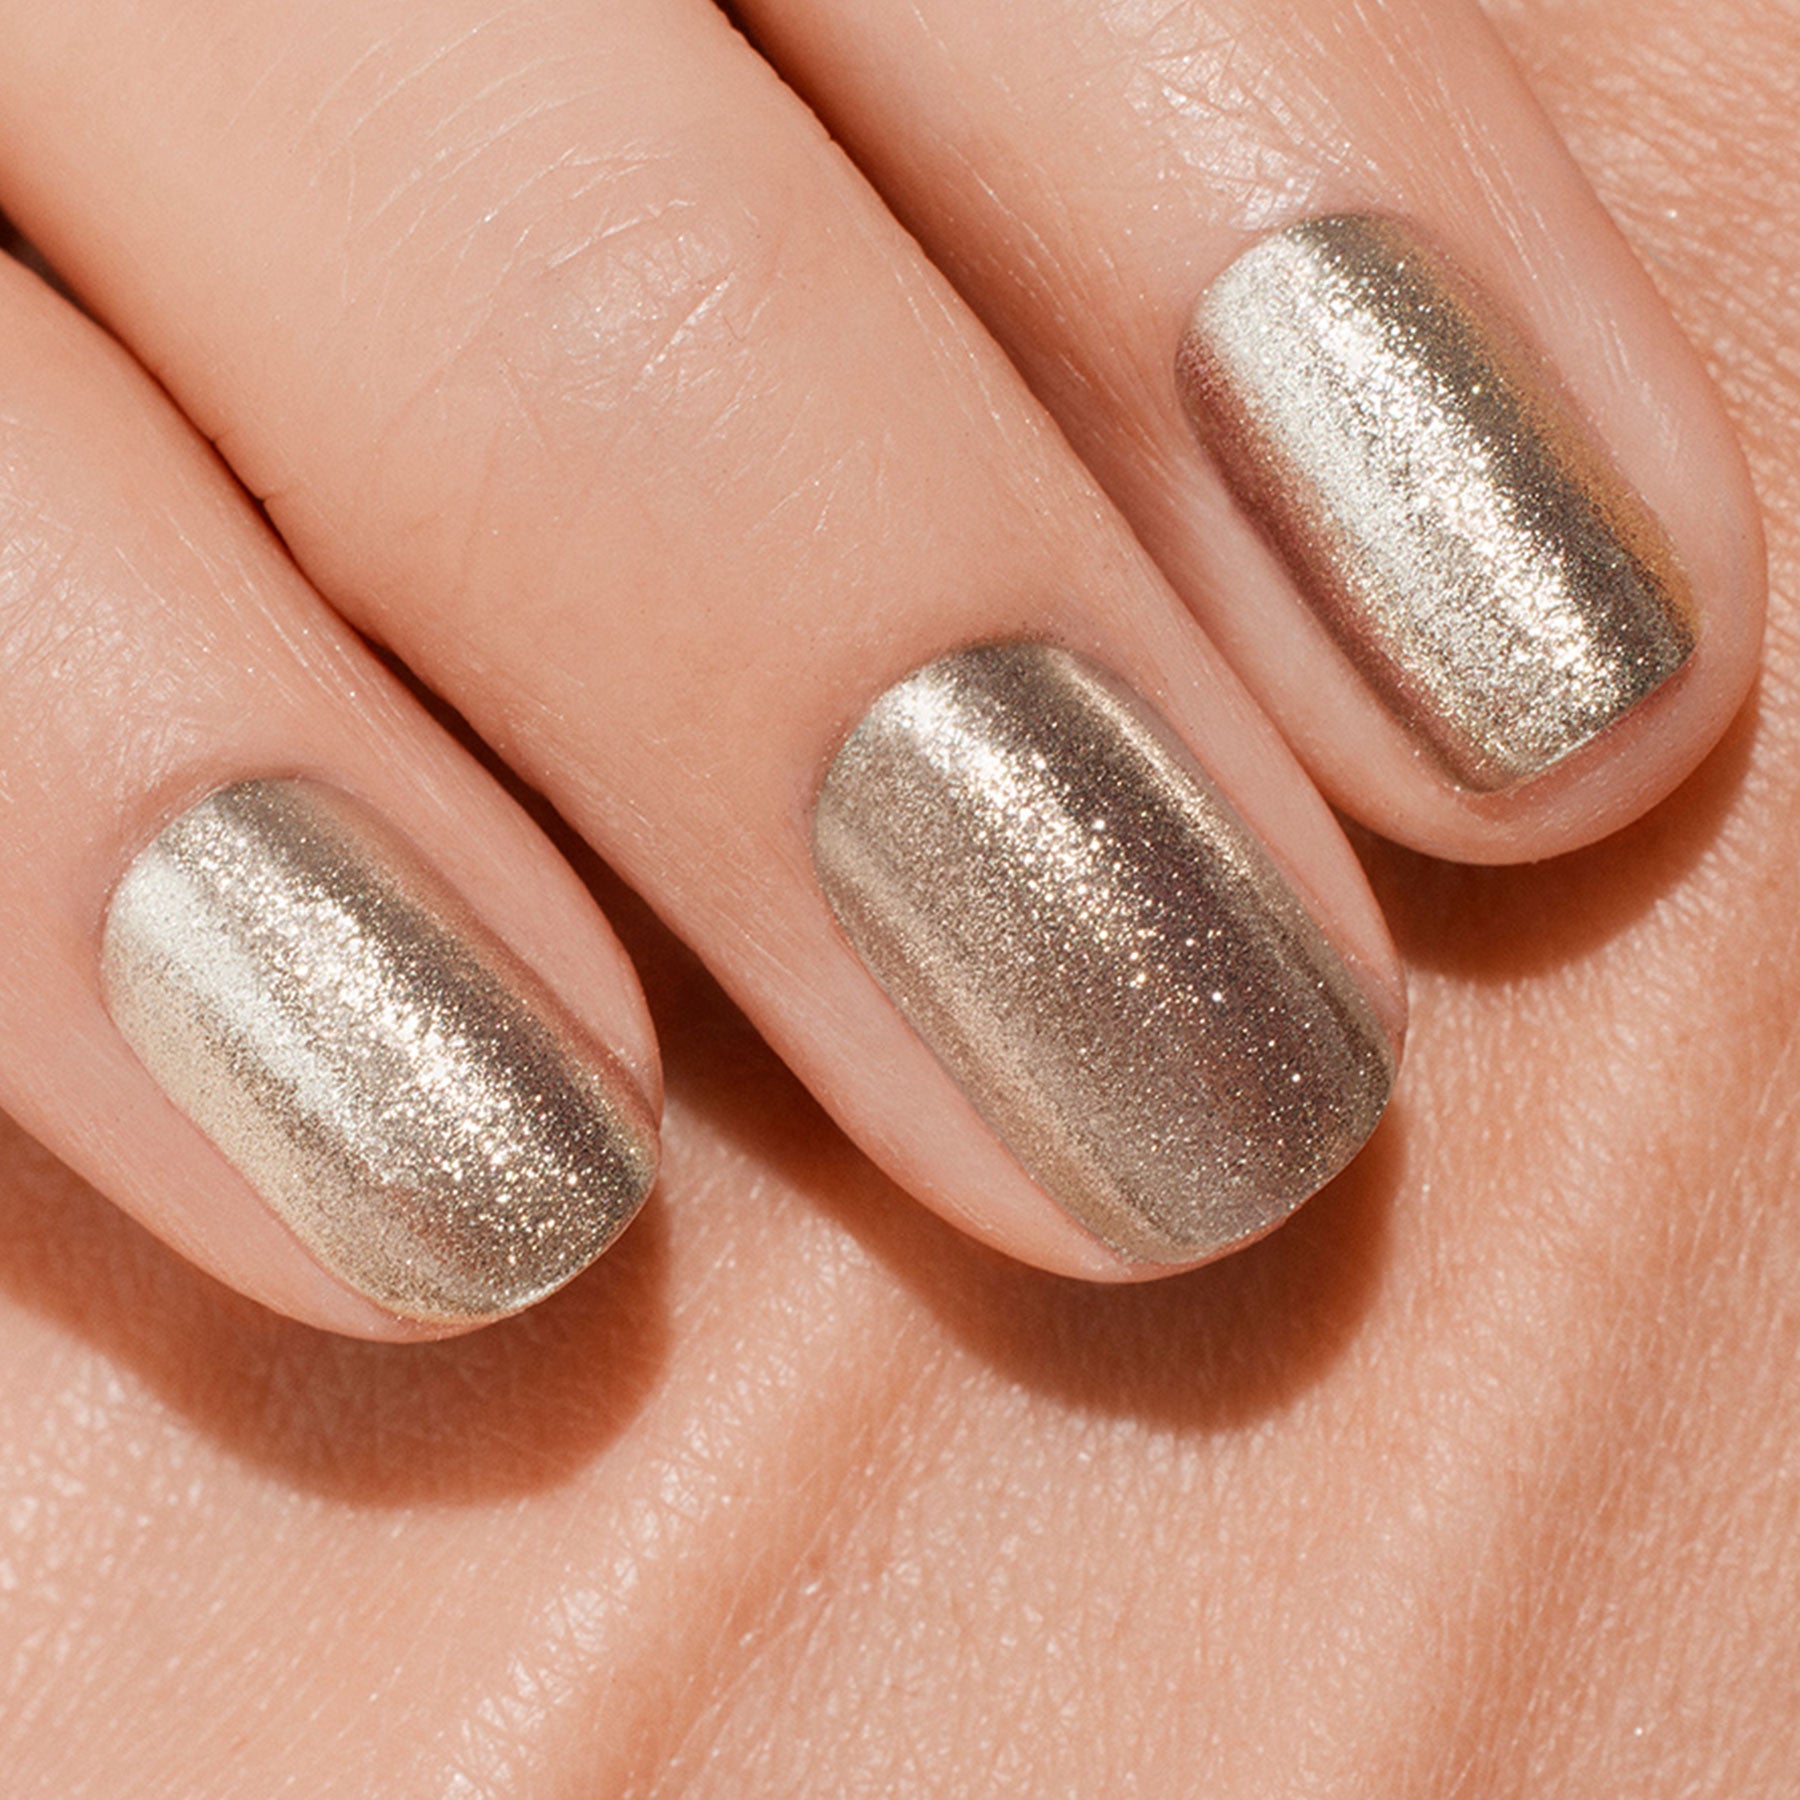 Metallic Glitter Dust / Pink Rose Gold – Daily Charme